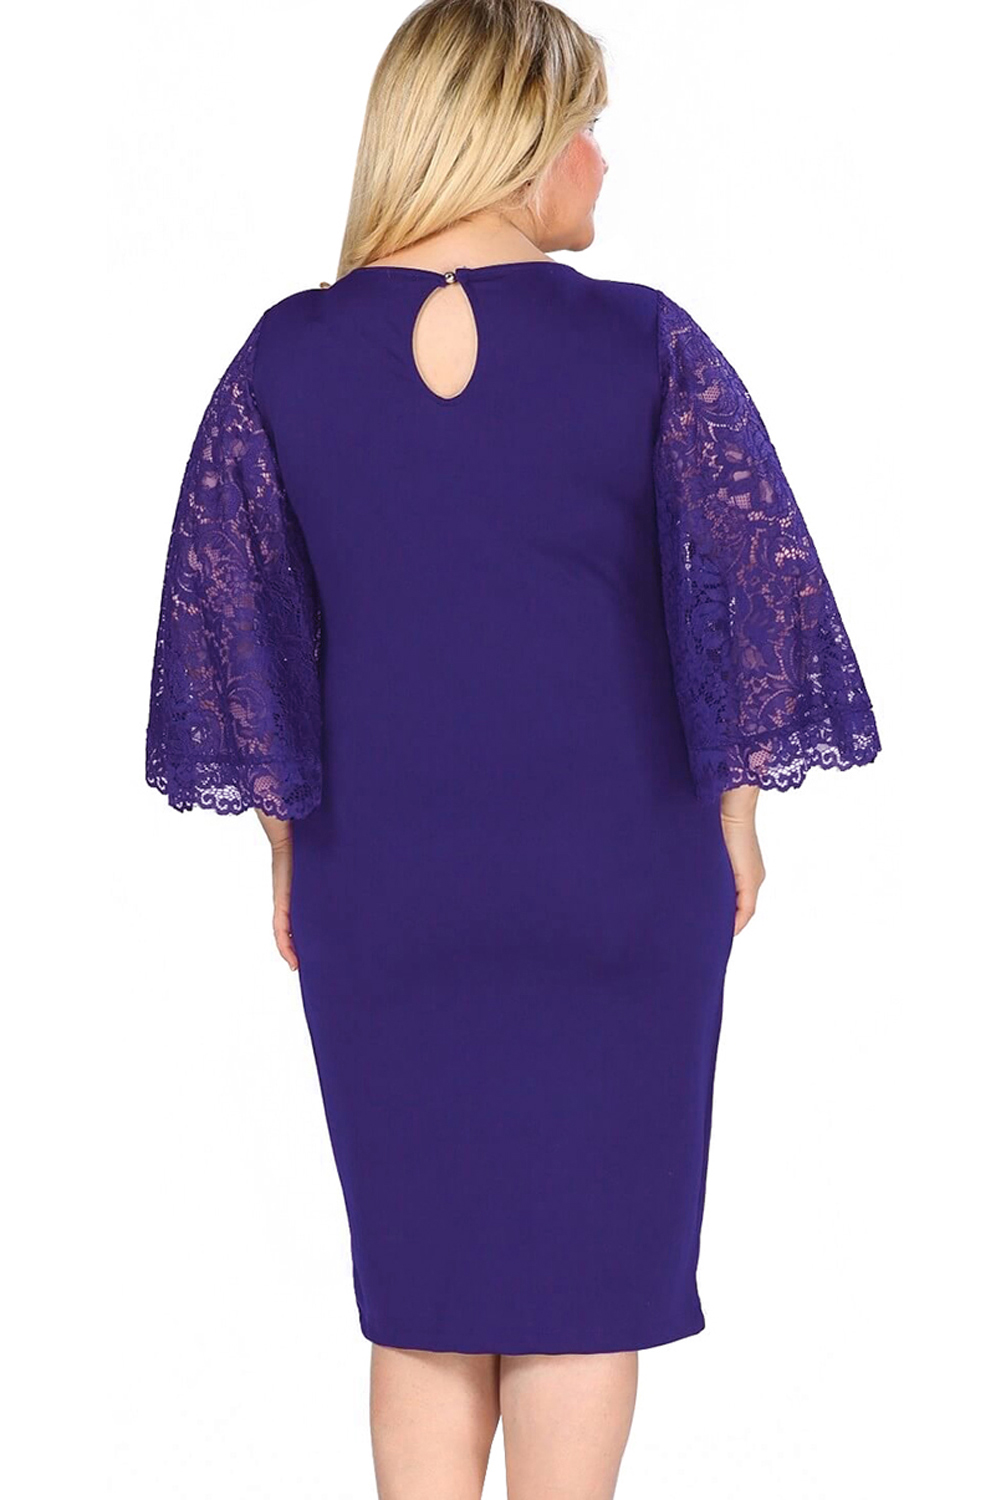 BY610518-5 NAVY LACE FLUTTER SLEEVE PLUS SIZE BODYCON DRESS